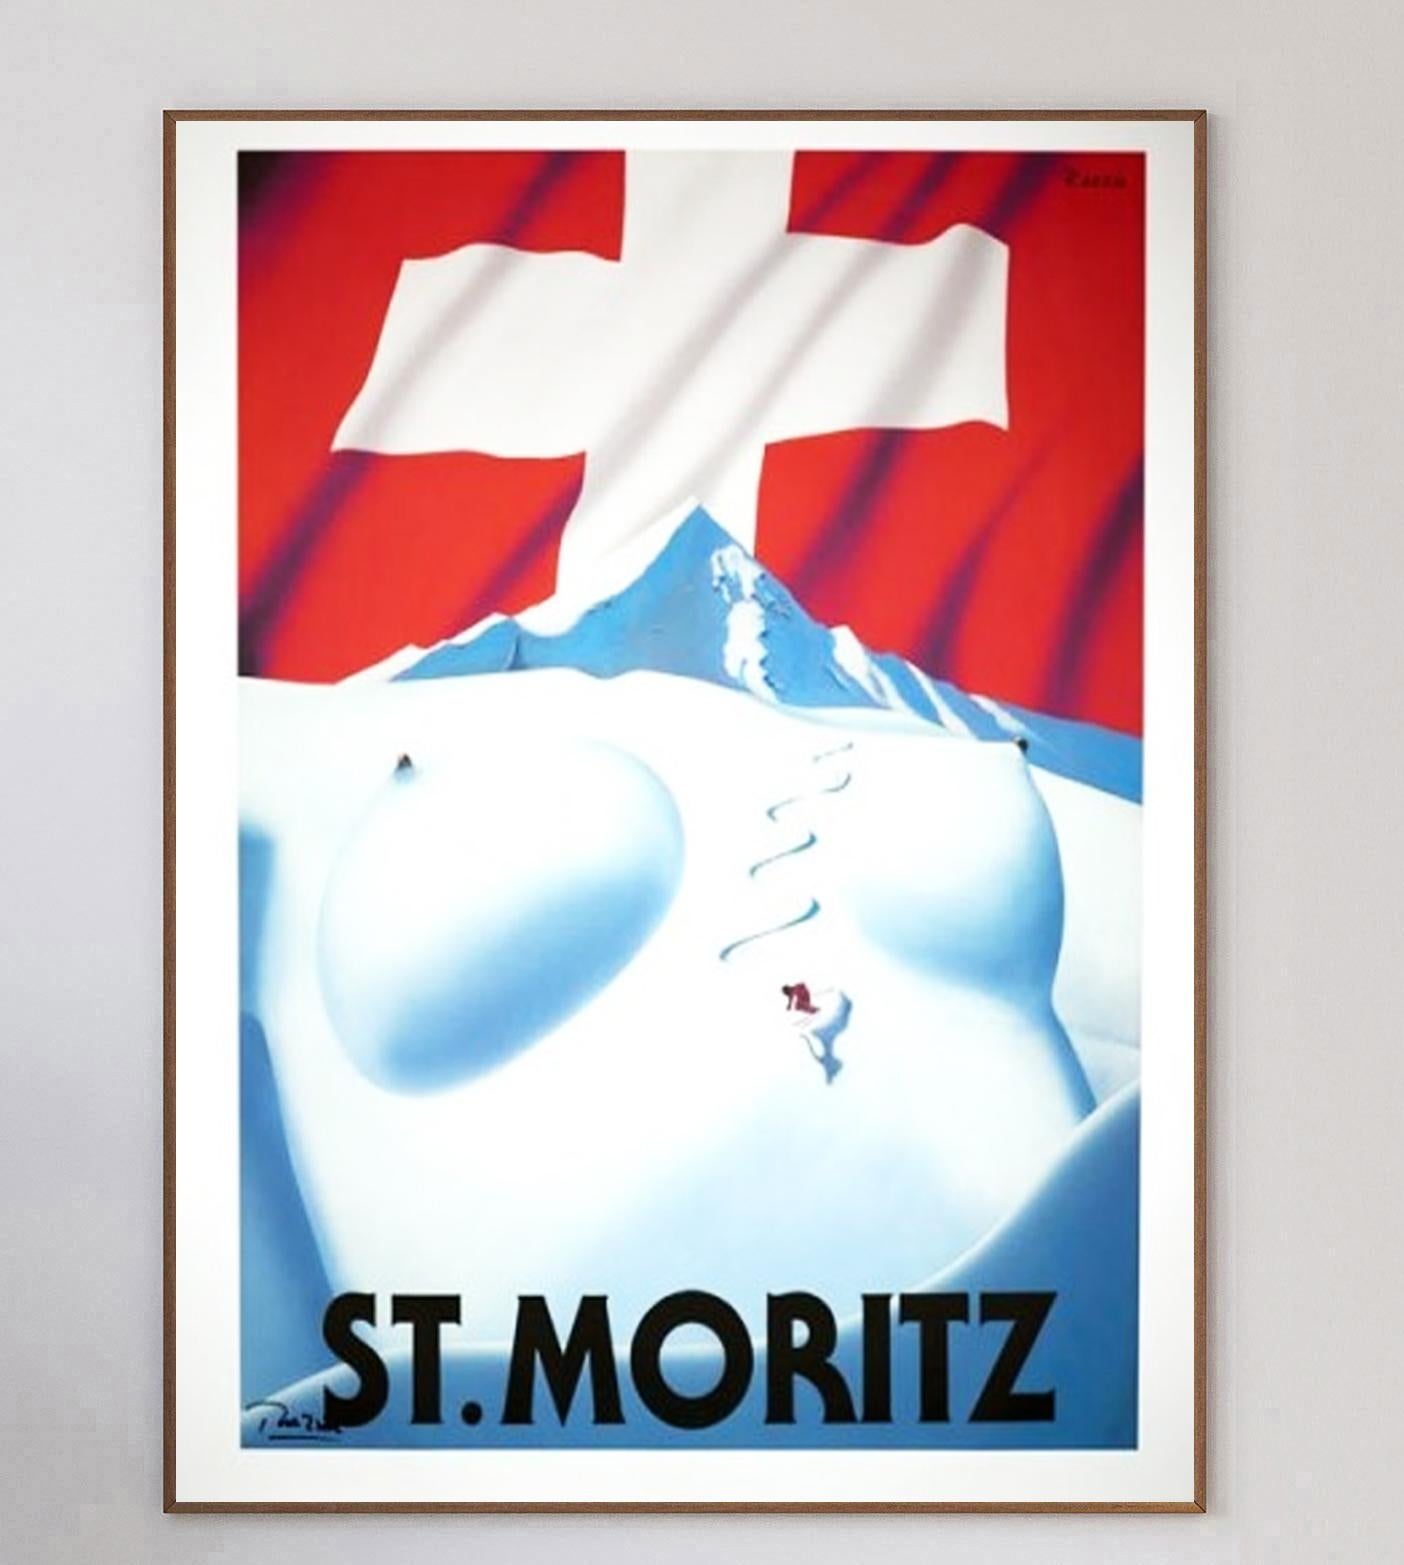 Regarded as the birthplace of alpine tourism, the luxurious Swiss resort town of St. Moritz is frequented by the rich & famous and has twice held the Winter Olympic Games. This gorgeous poster by the iconic poster designer Razzia promotes the town,